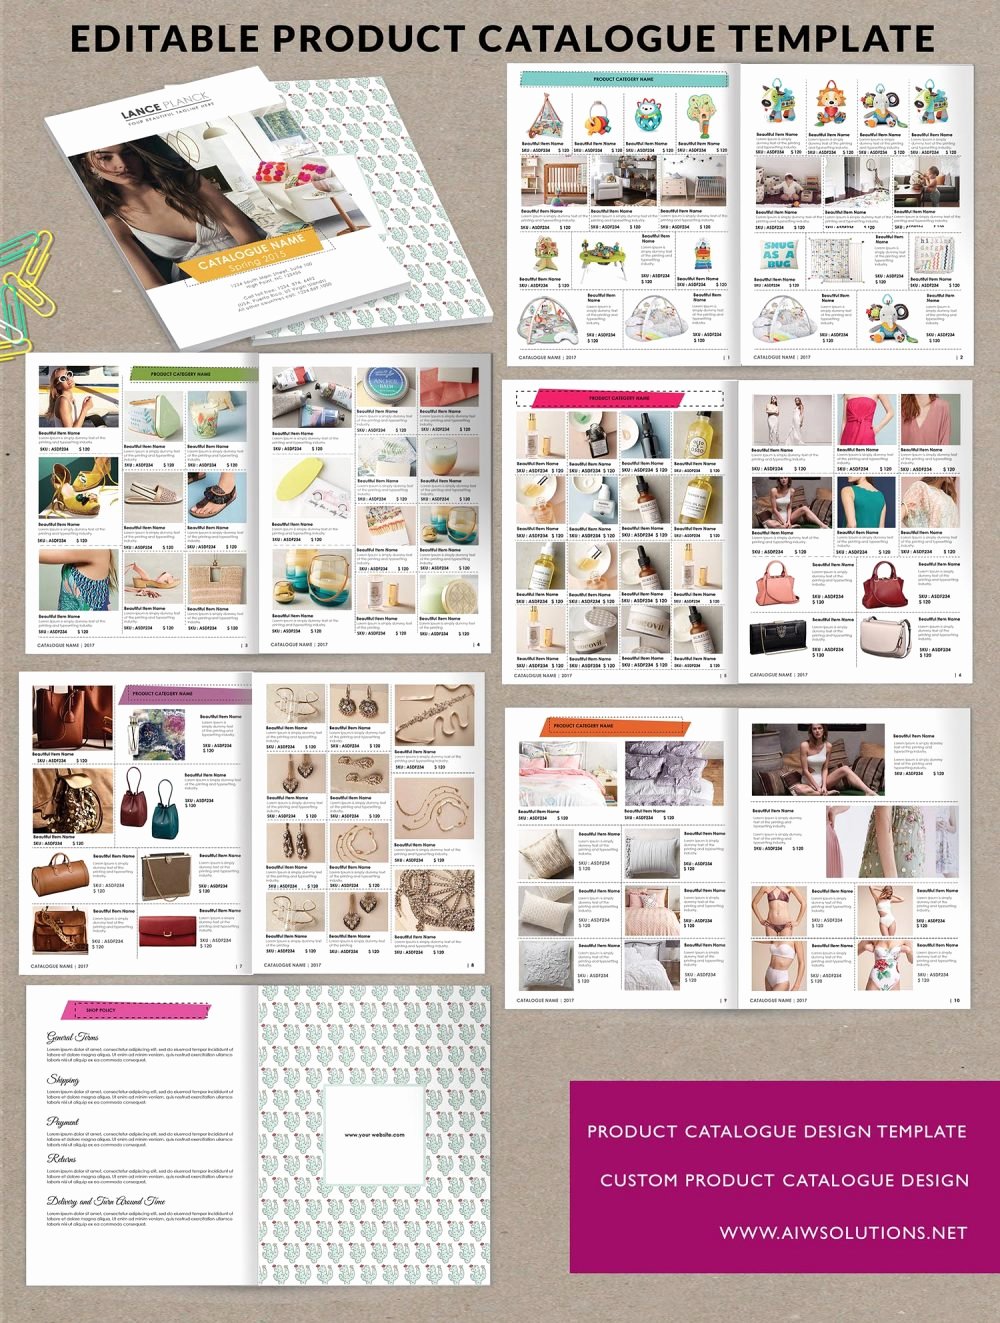 Product Catalog Design Template Luxury Product Catalog Template for Hat Catalog Shoe Catalog